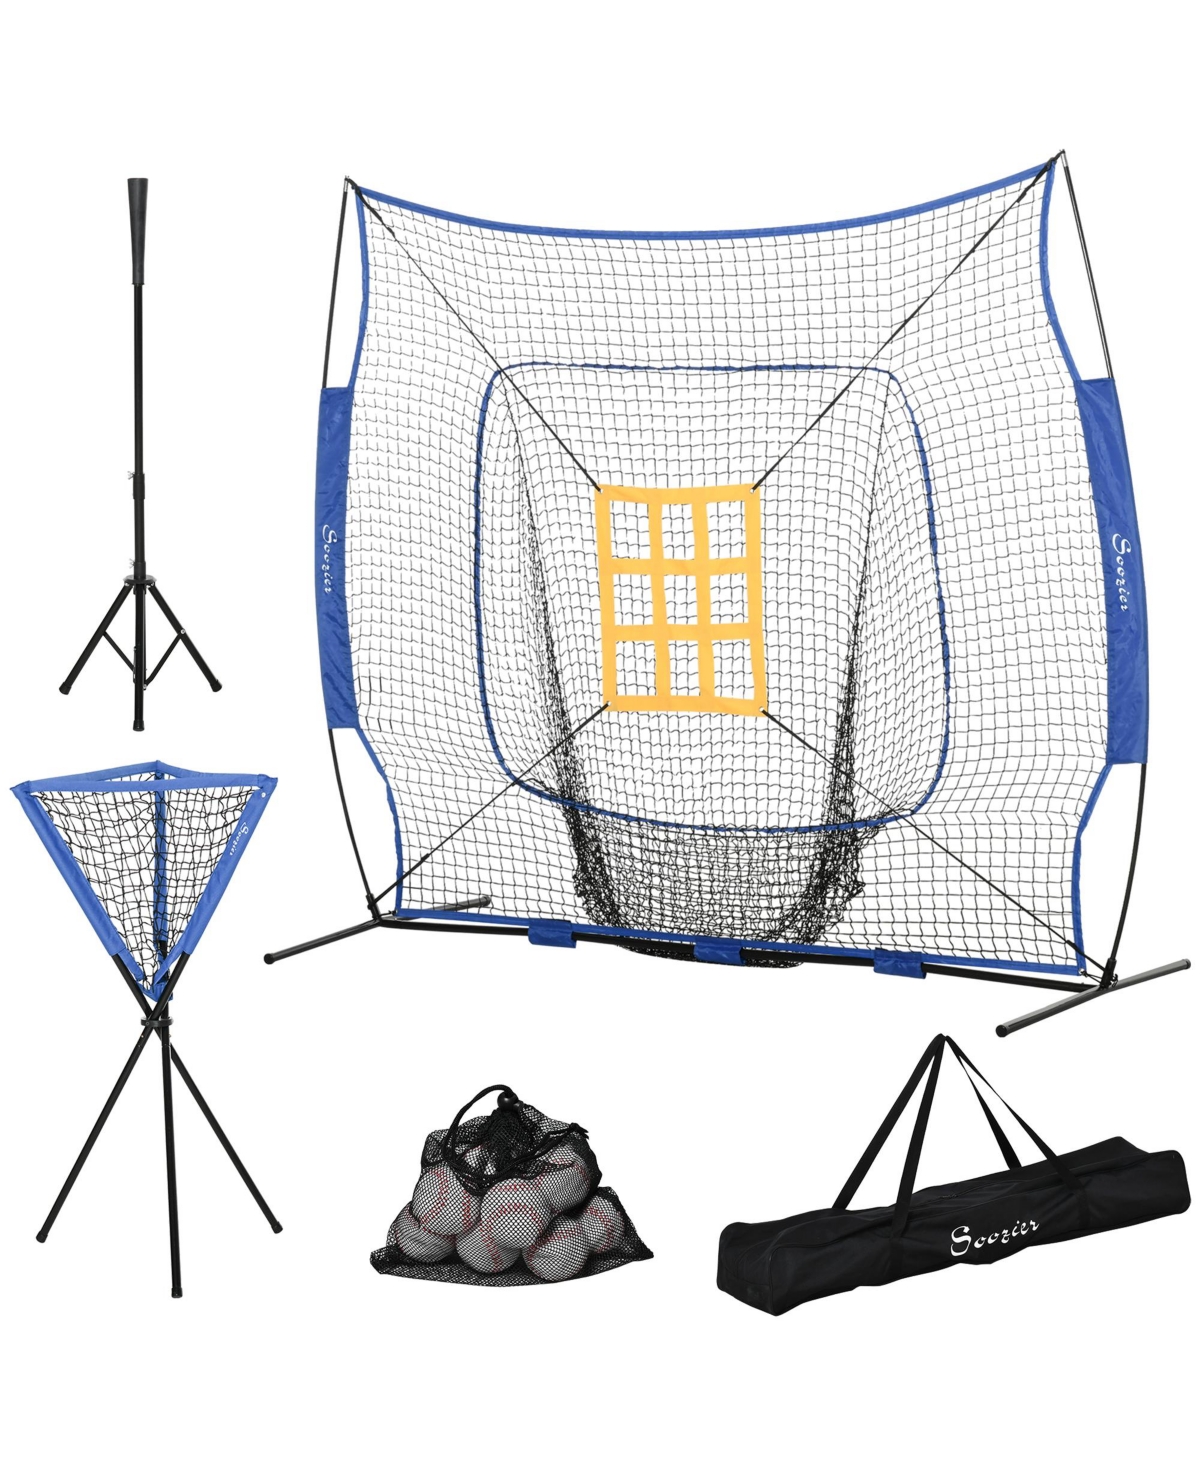 Baseball Practice Net Set with 7.5x7ft Catcher Net, Ball Caddy and Batting Tee, Portable Baseball Practice Equipment with Carry Bag for Hittin